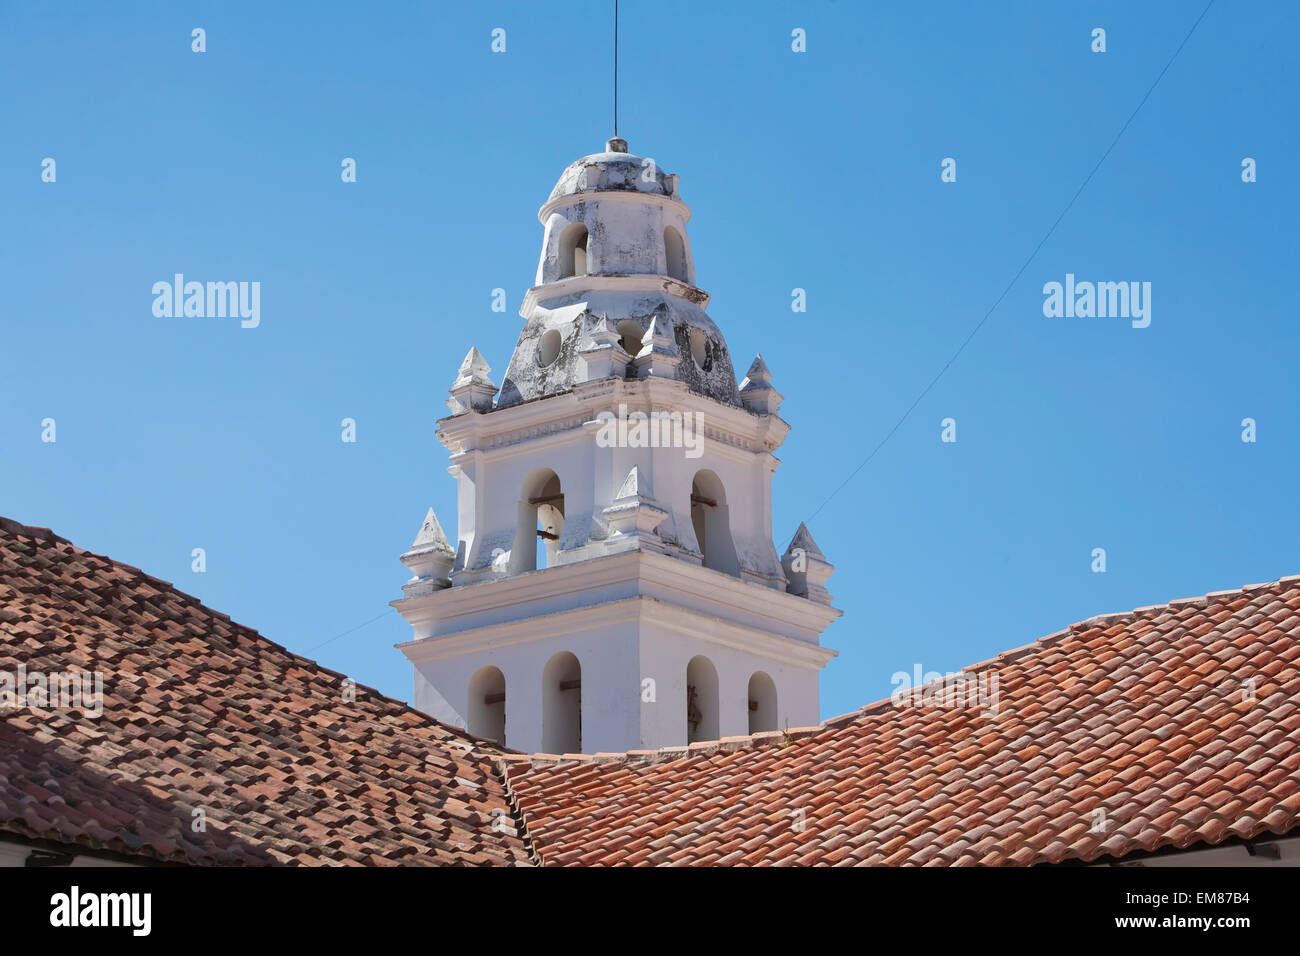 Tower Of The Church Of San Francisco, Sucre, Chuquisaca Department, Bolivia Stock Photo